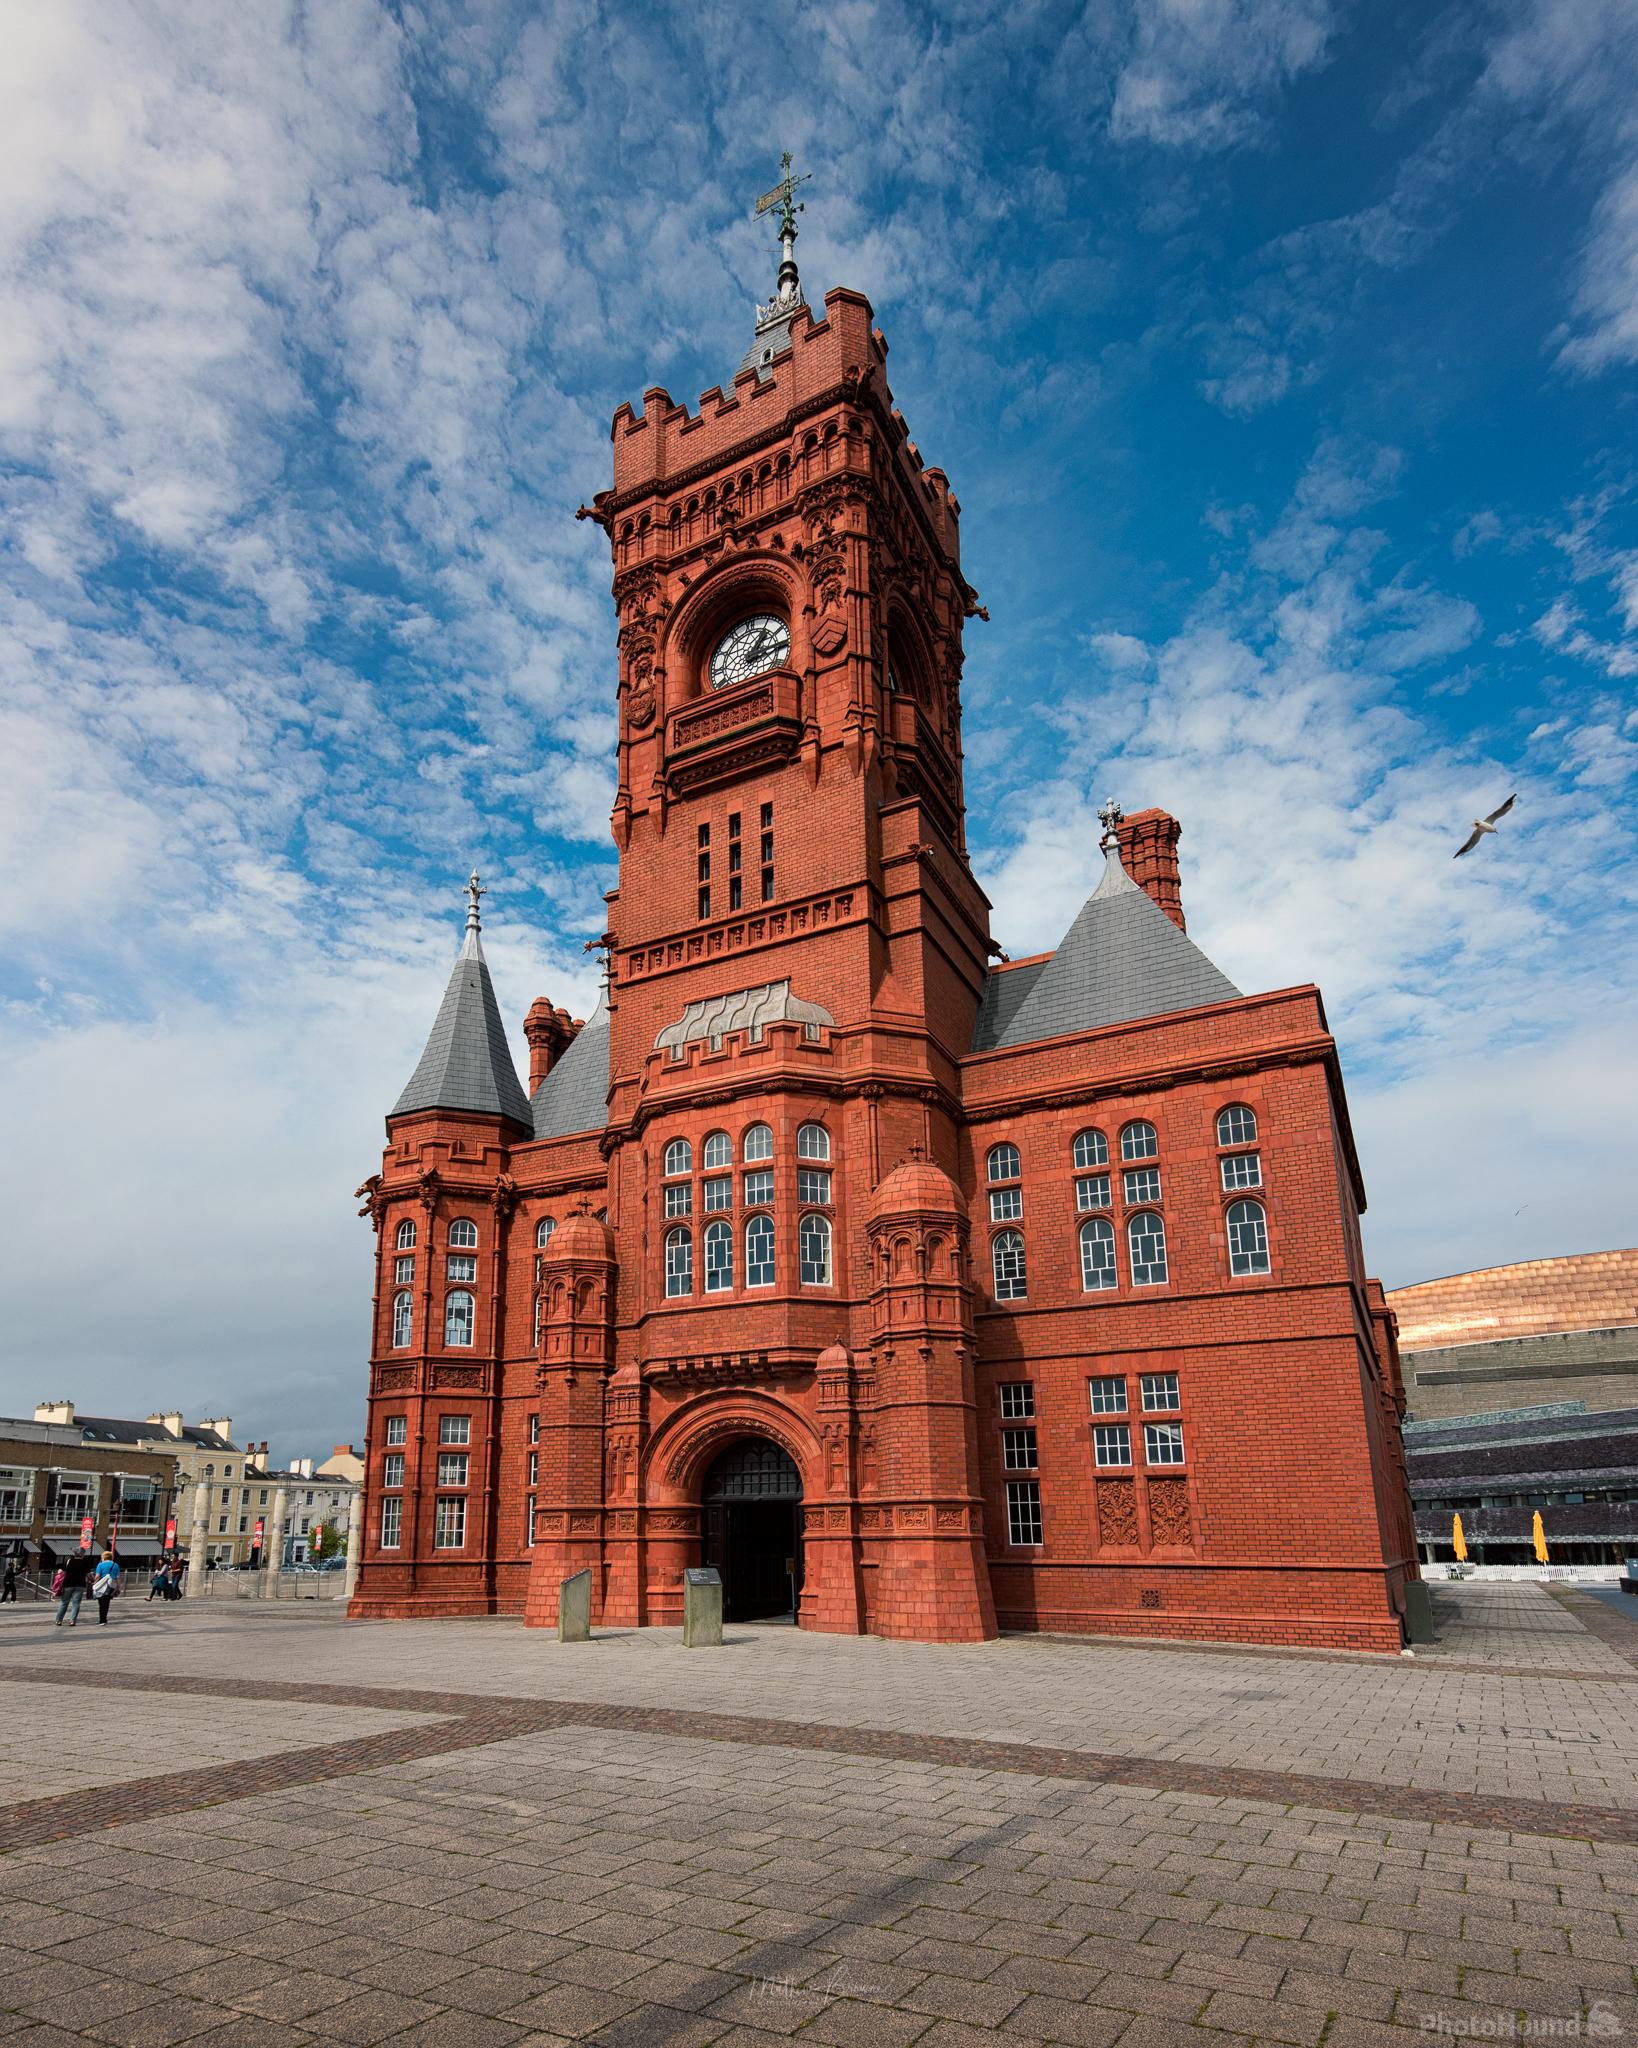 Image of Pierhead Building by Mathew Browne